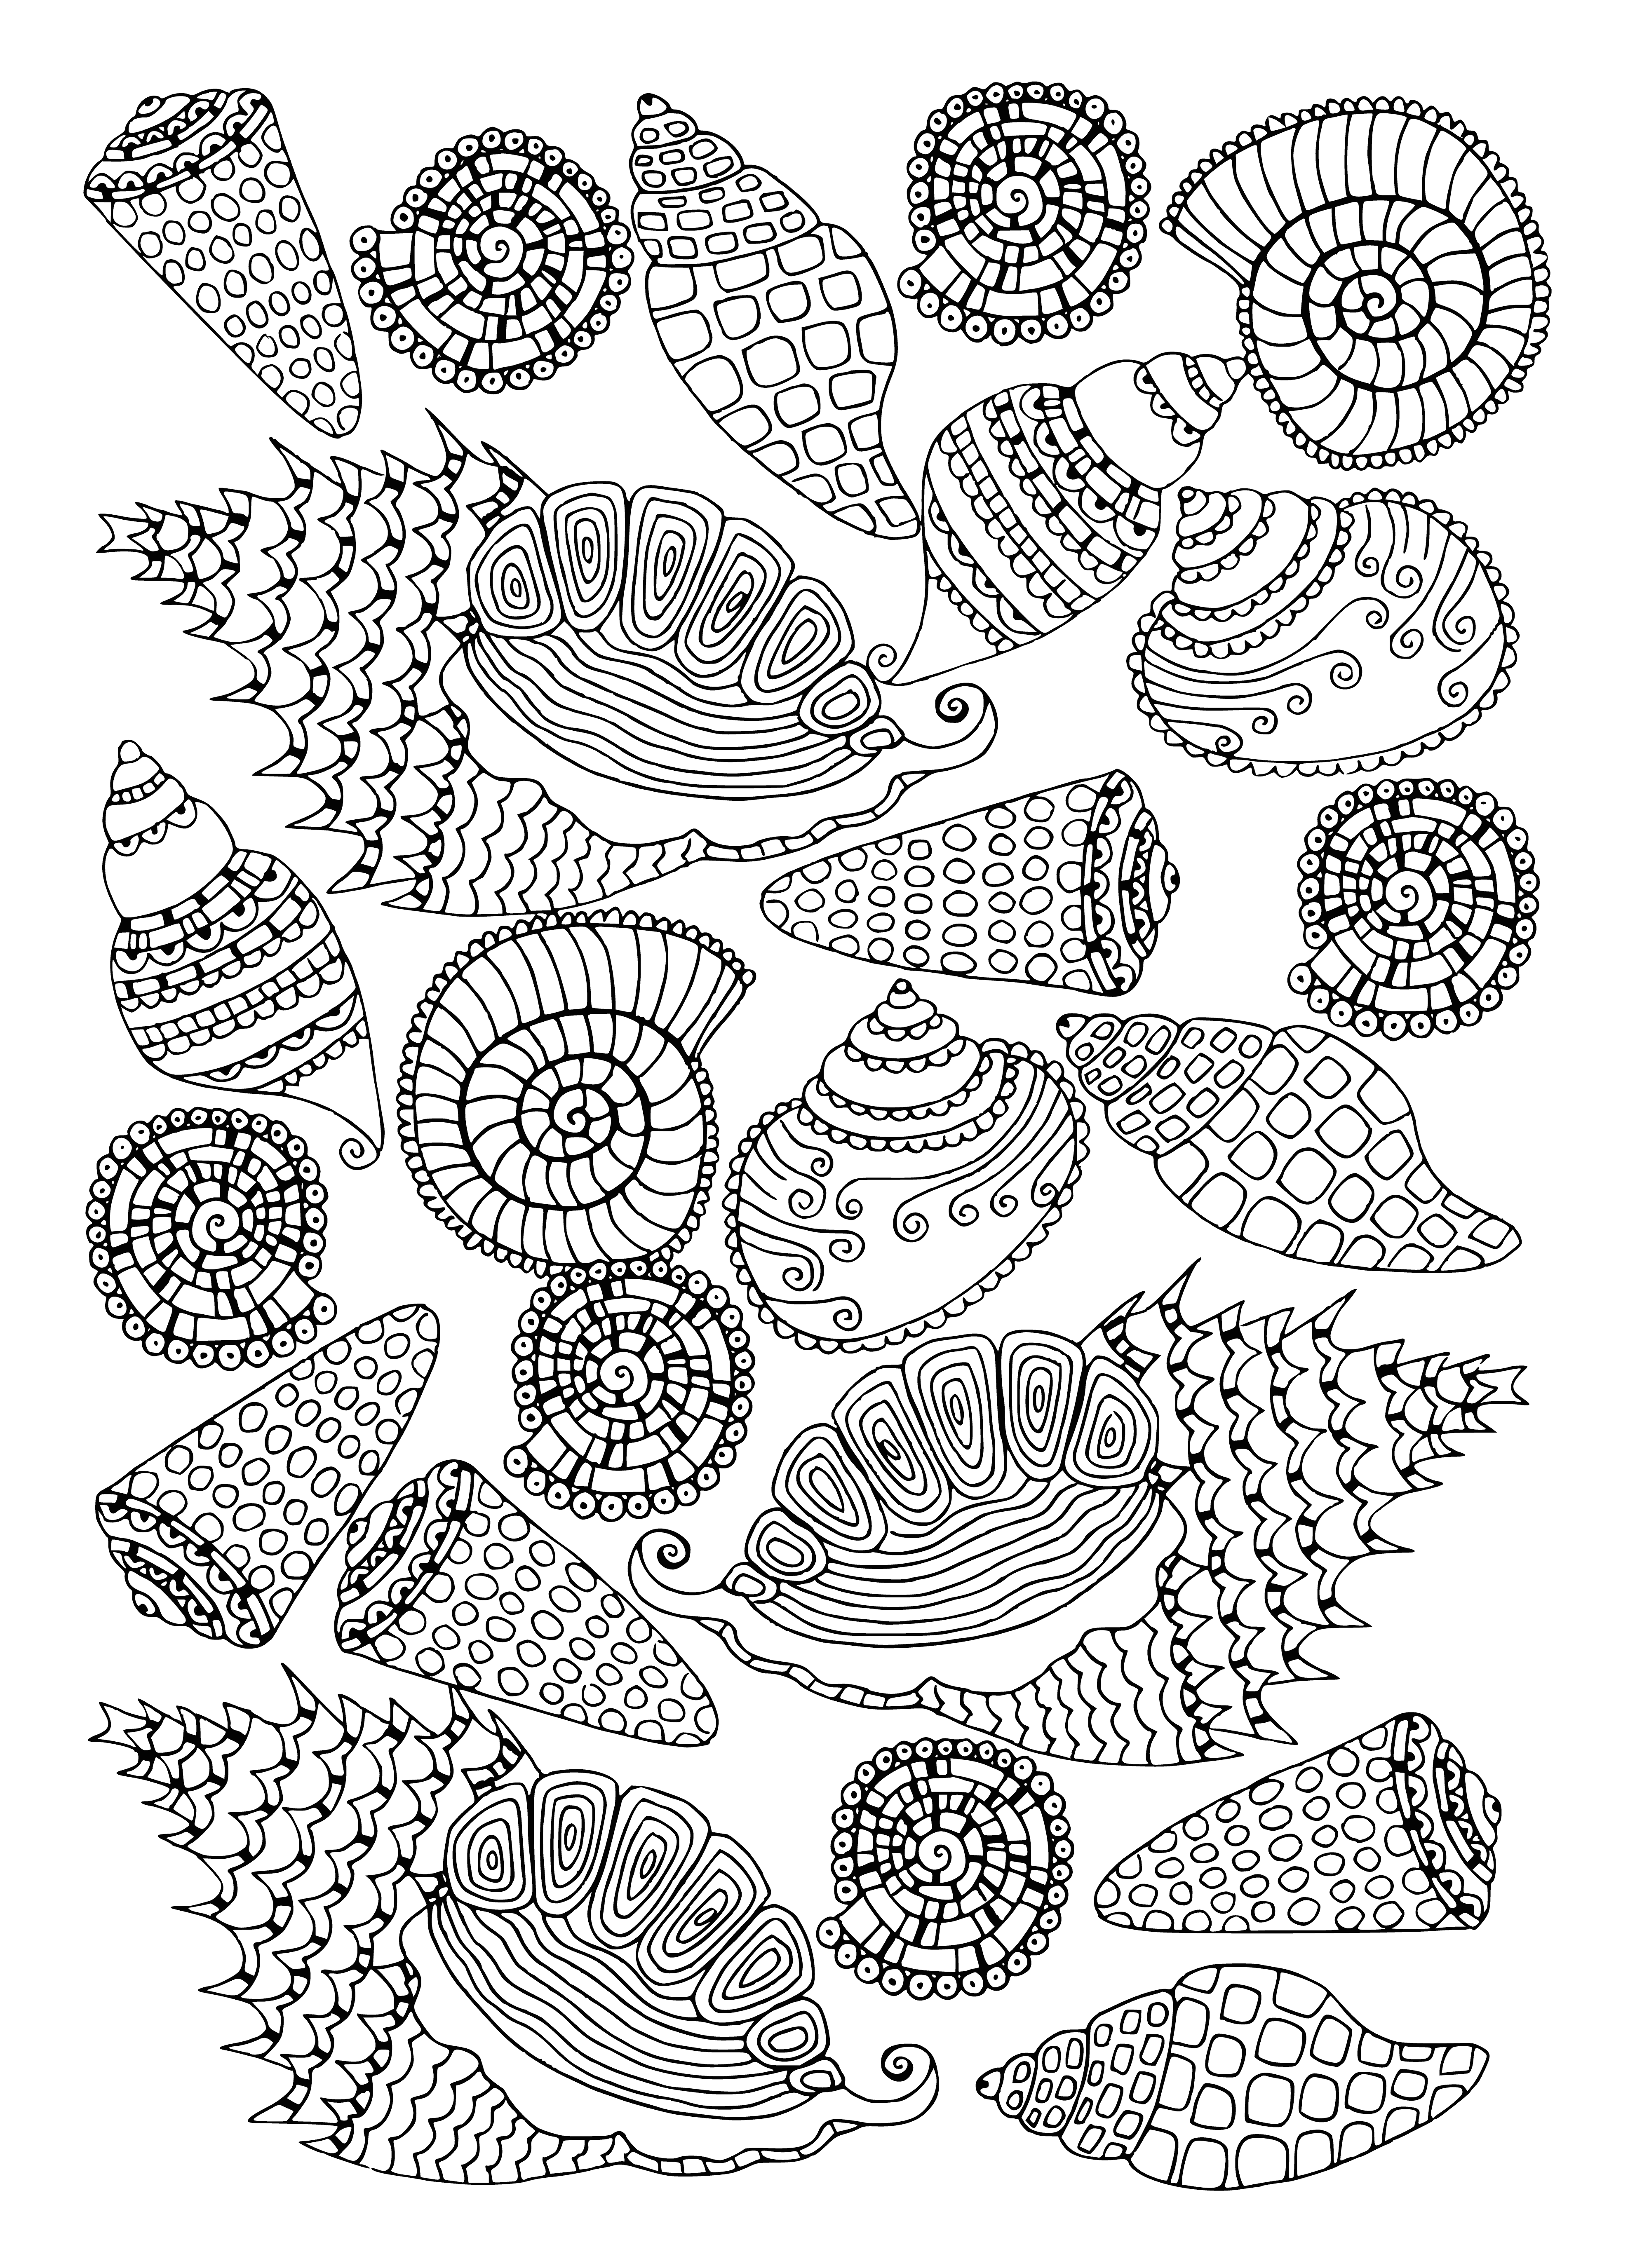 coloring page: A coloring page of seashells, rocks, and seaweed. Different colors, shapes, and sizes with some having patterns.